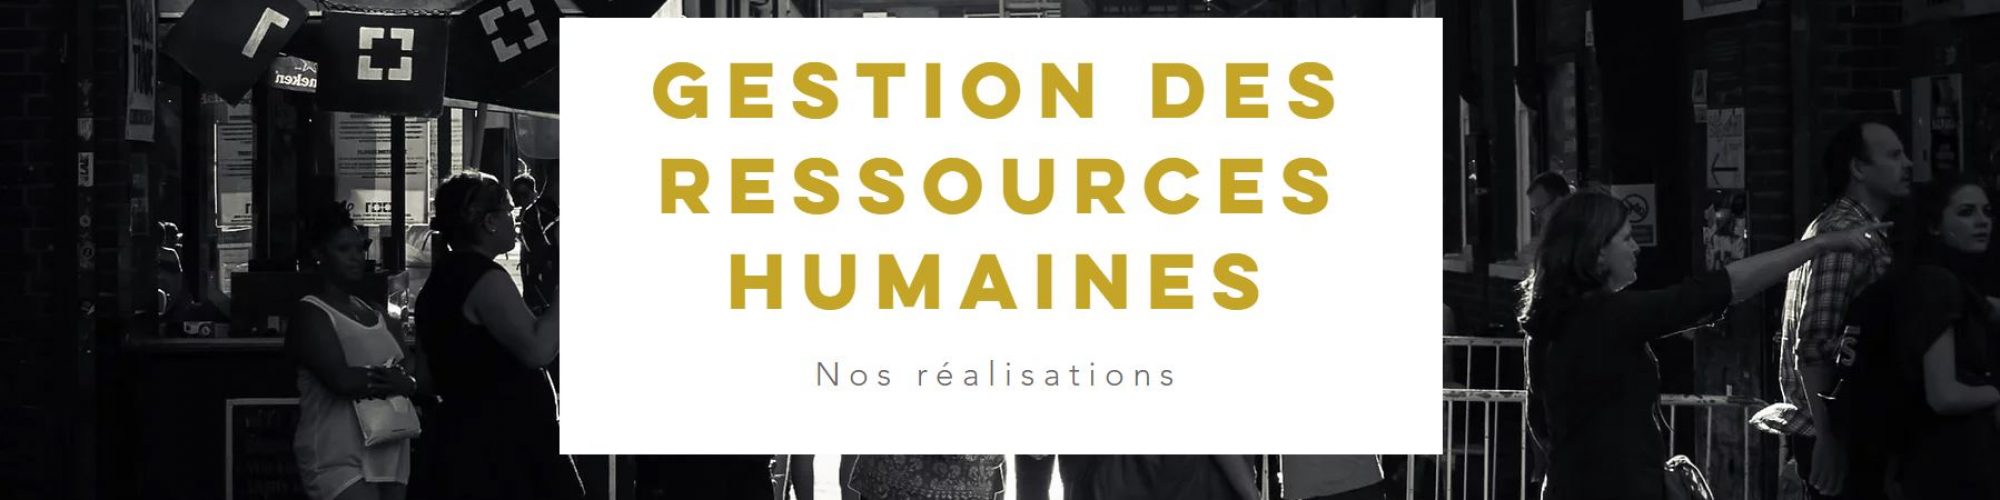 realisations gestion des ressources humaines cecileboury